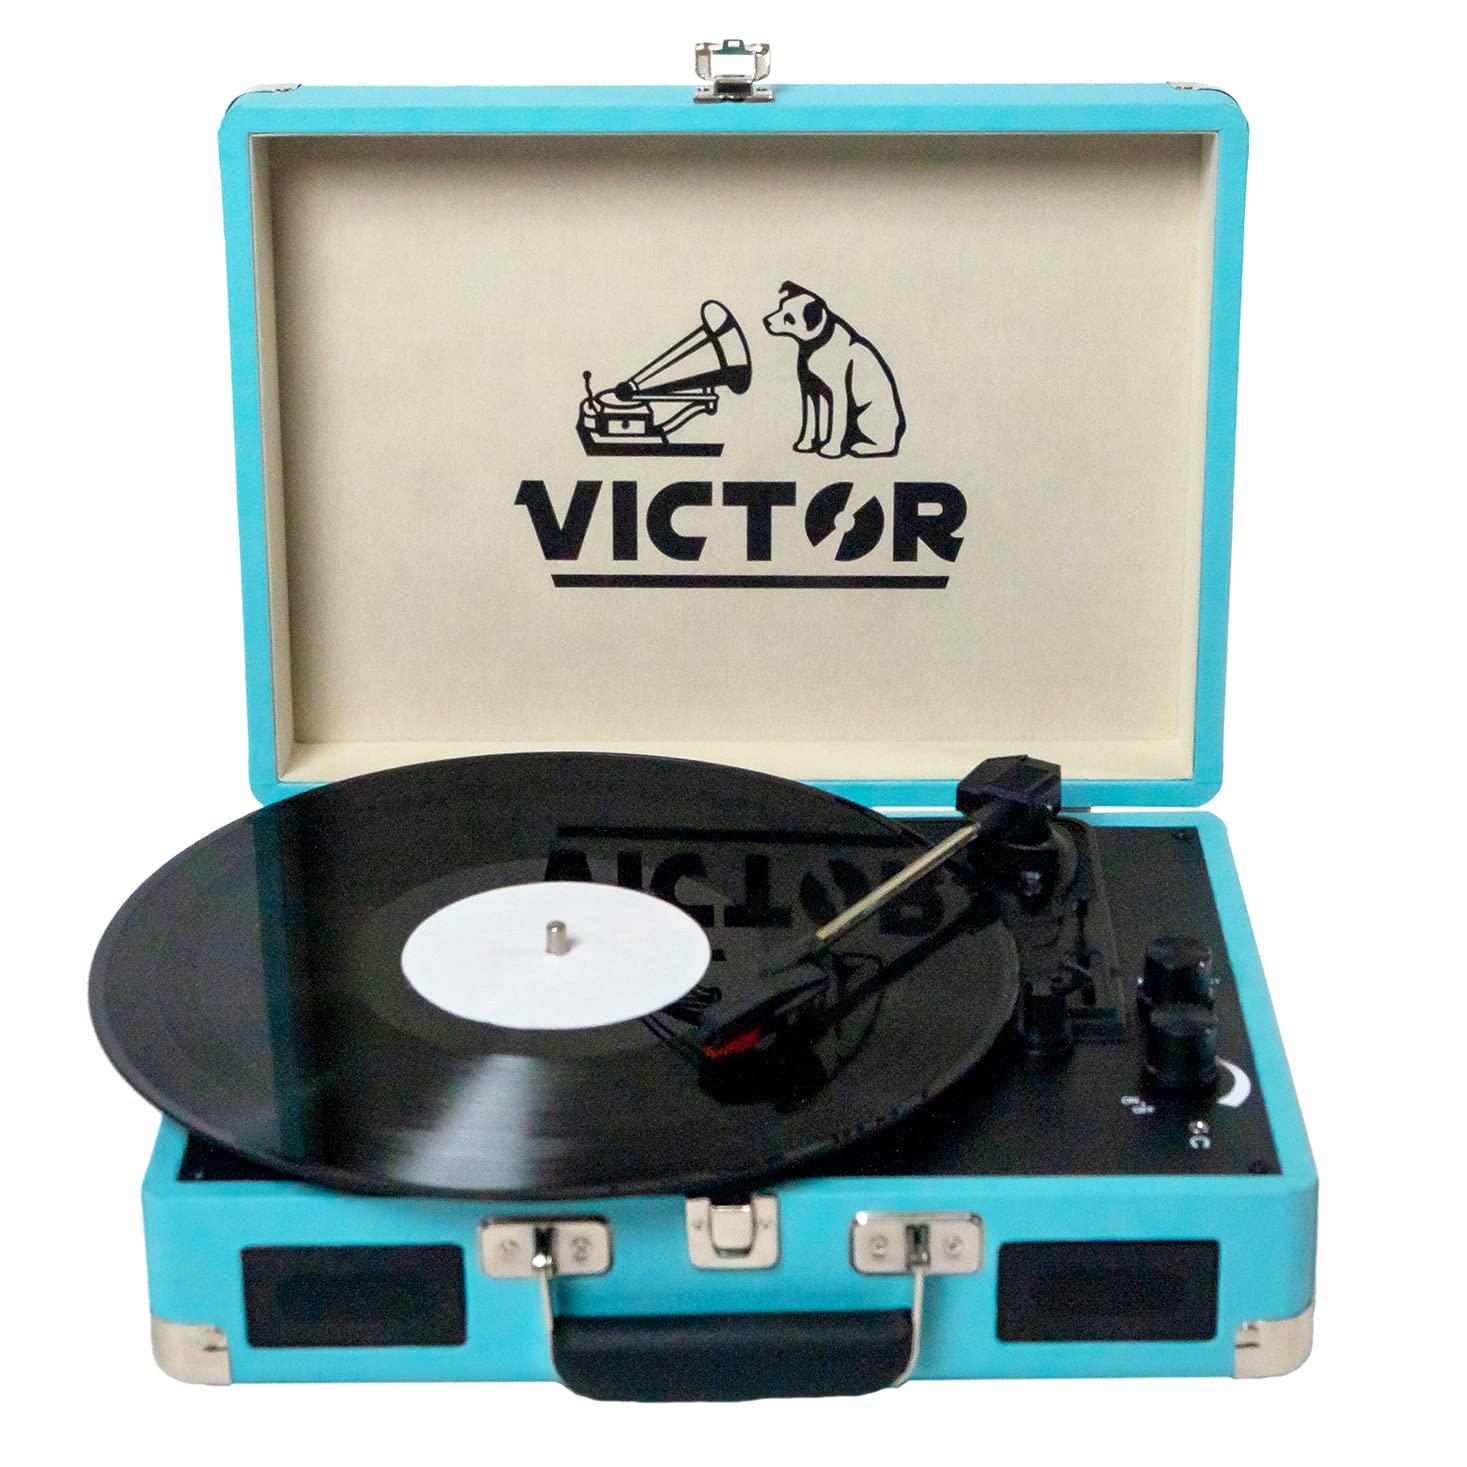 VICTOR VSRP-800-TQ TURQUOISE METRO SUITCASE TURNTABLE